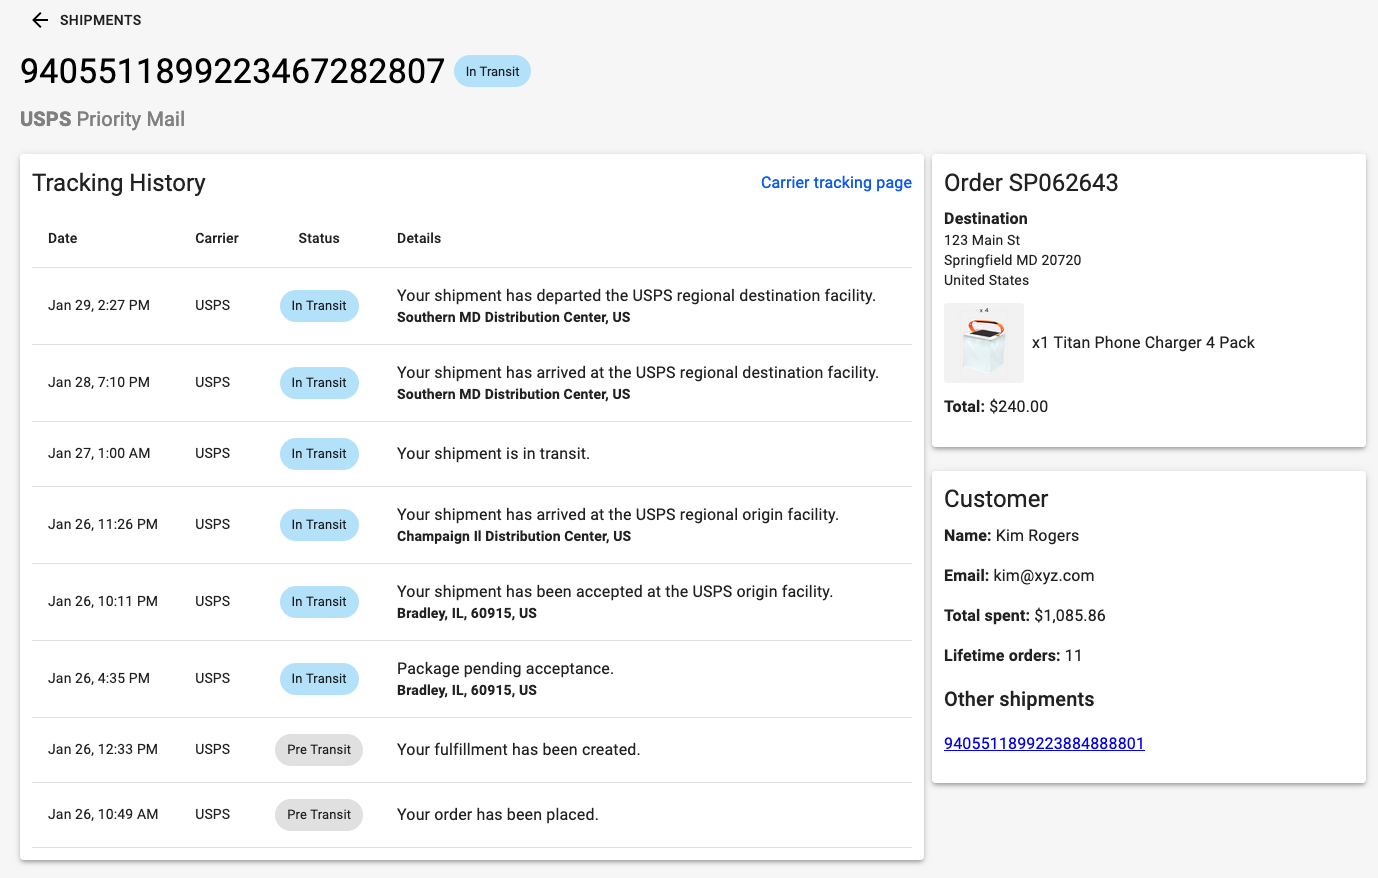 Understand Your Customer’s Delivery Experience with the Shipment Detail View